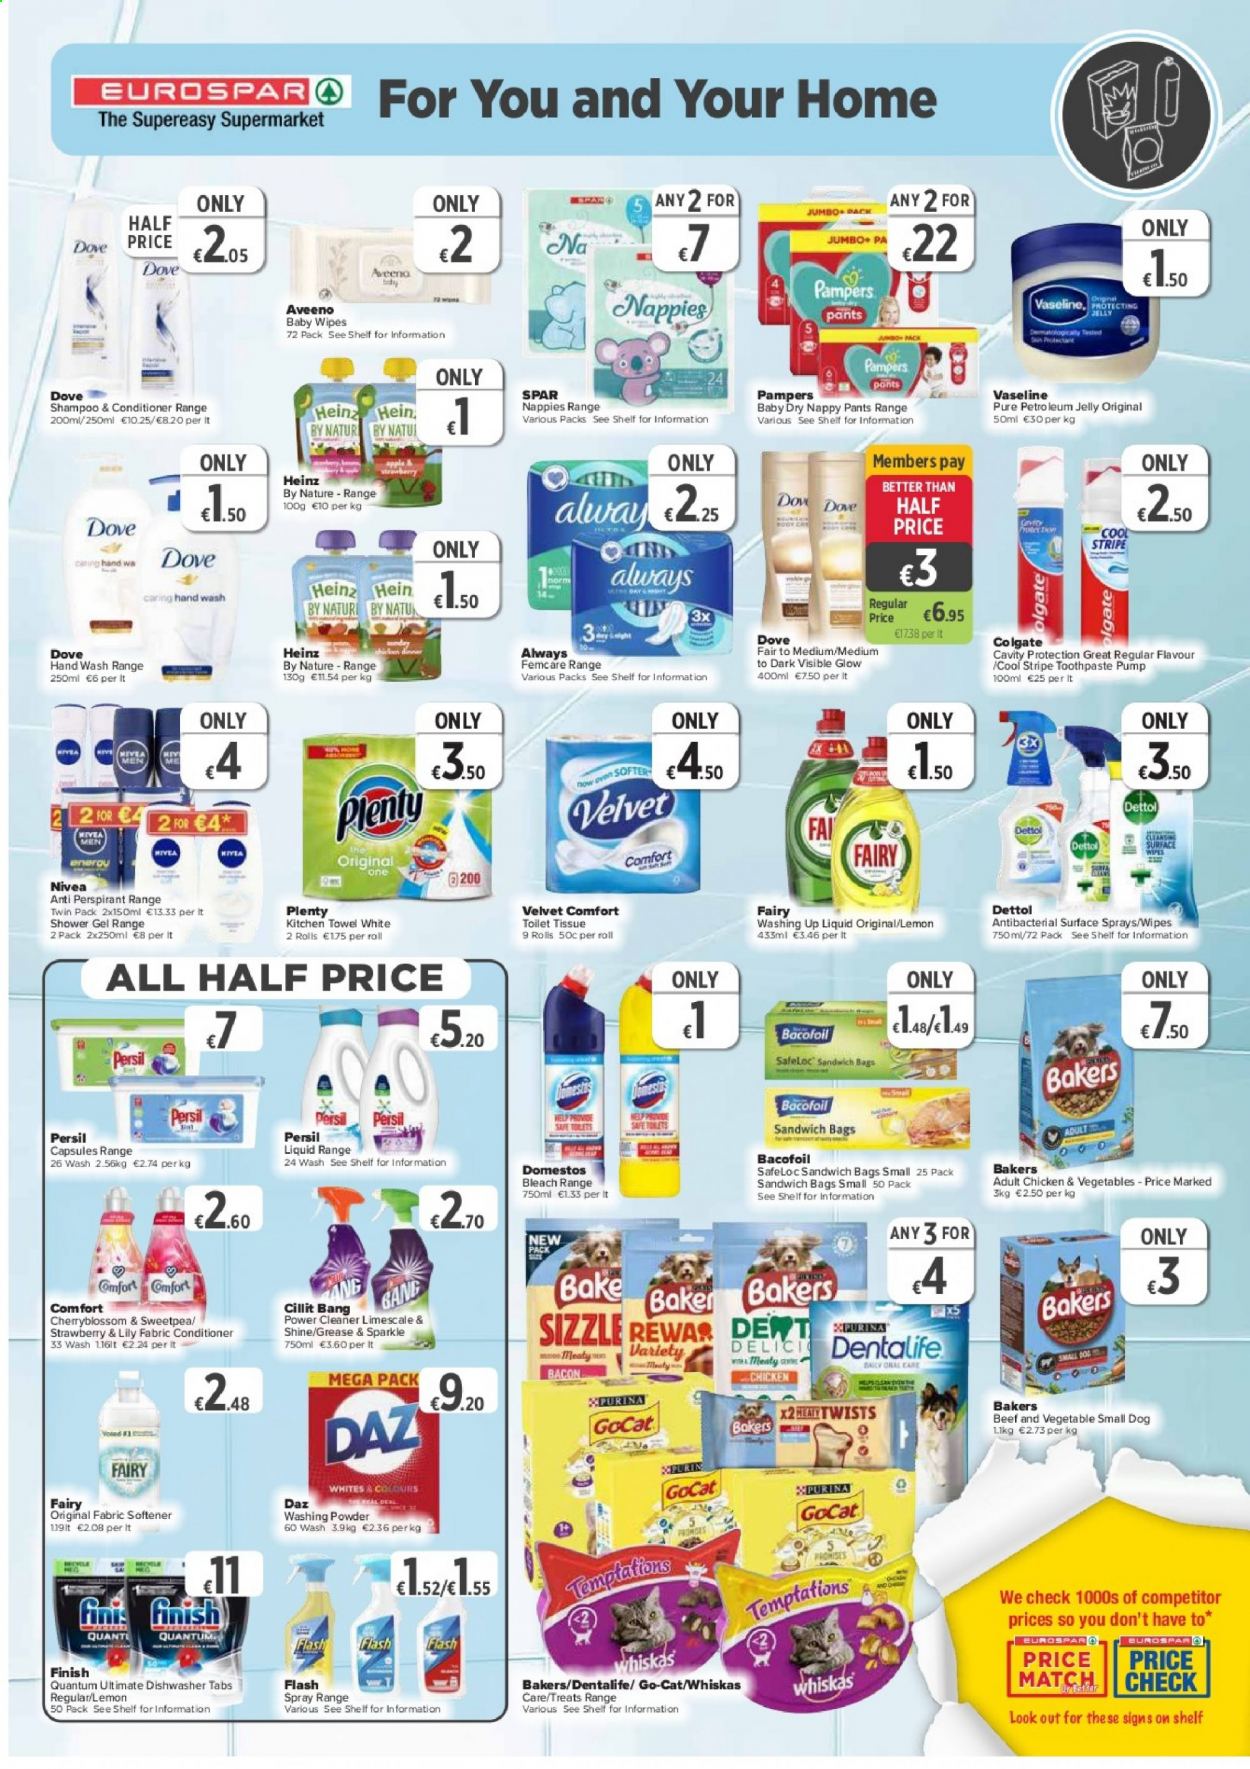 thumbnail - EUROSPAR offer  - 19.08.2021 - 08.09.2021 - Sales products - bacon, jelly, Heinz, wipes, Pampers, pants, baby wipes, nappies, Aveeno, Dettol, Nivea, Dove, toilet paper, Plenty, kitchen towels, Domestos, cleaner, bleach, Fairy, Persil, fabric softener, laundry powder, Daz Powder, dishwashing liquid, Finish Powerball, Finish Quantum Ultimate, shampoo, shower gel, hand wash, Vaseline, Colgate, toothpaste, bag, Purina, Whiskas, Go-Cat, Bakers, Dentalife. Page 7.